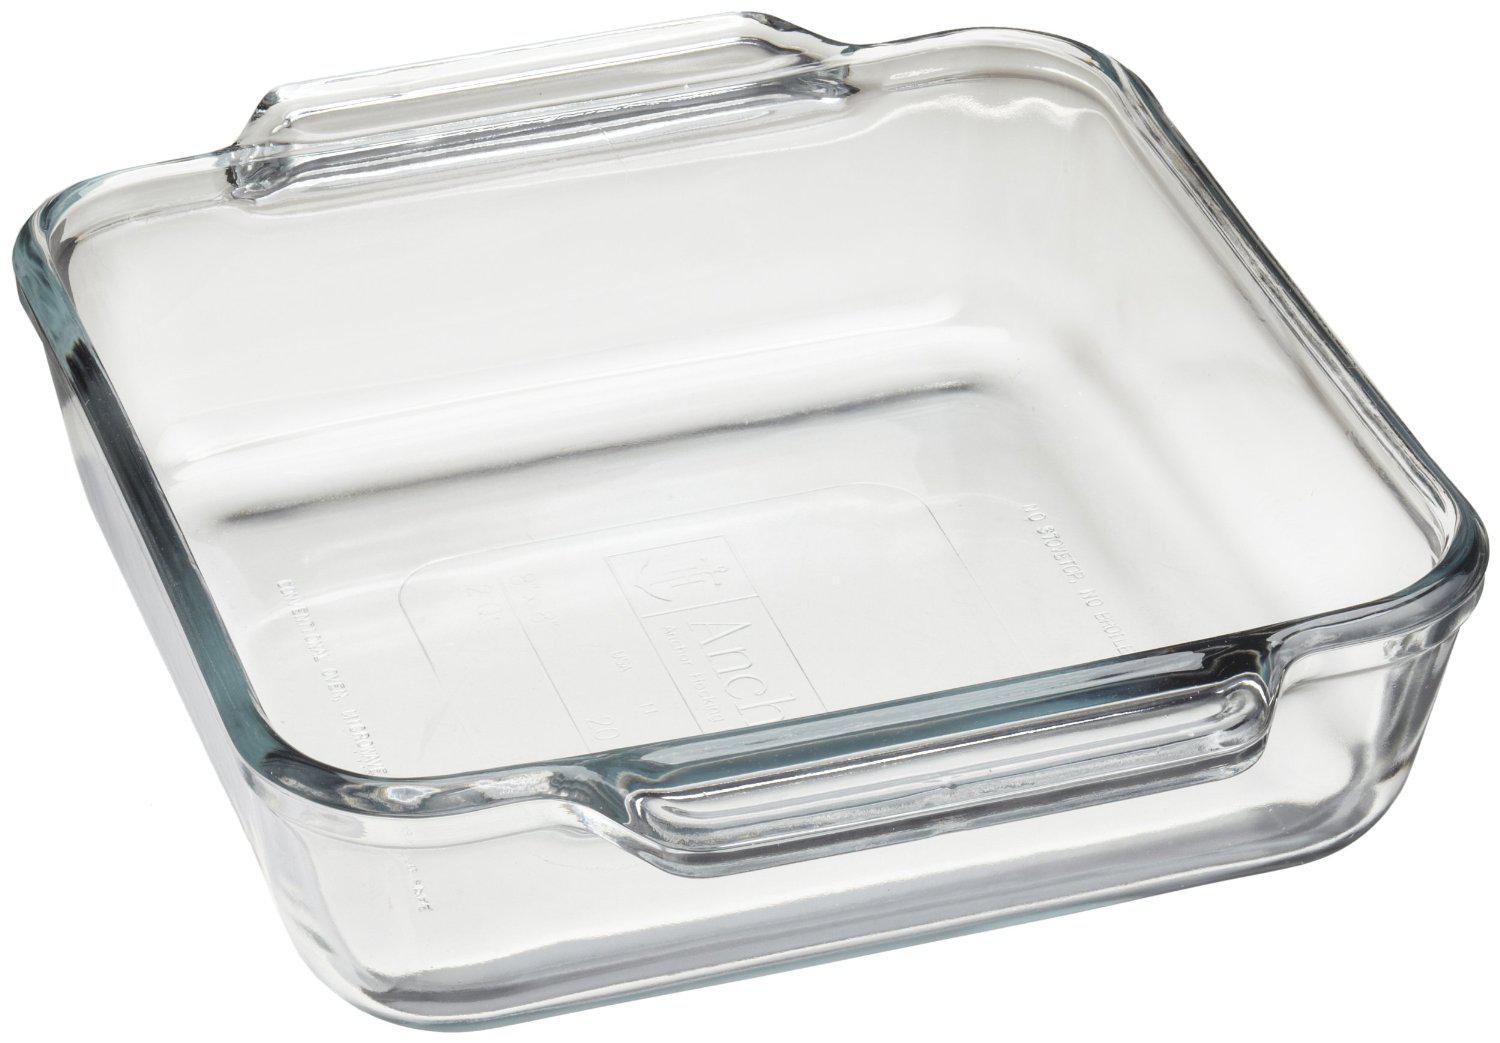 Anchor Hocking 8-Inch Square Glass Baking Dish with Cherry TrueFit Lid -  The Online Drugstore ©